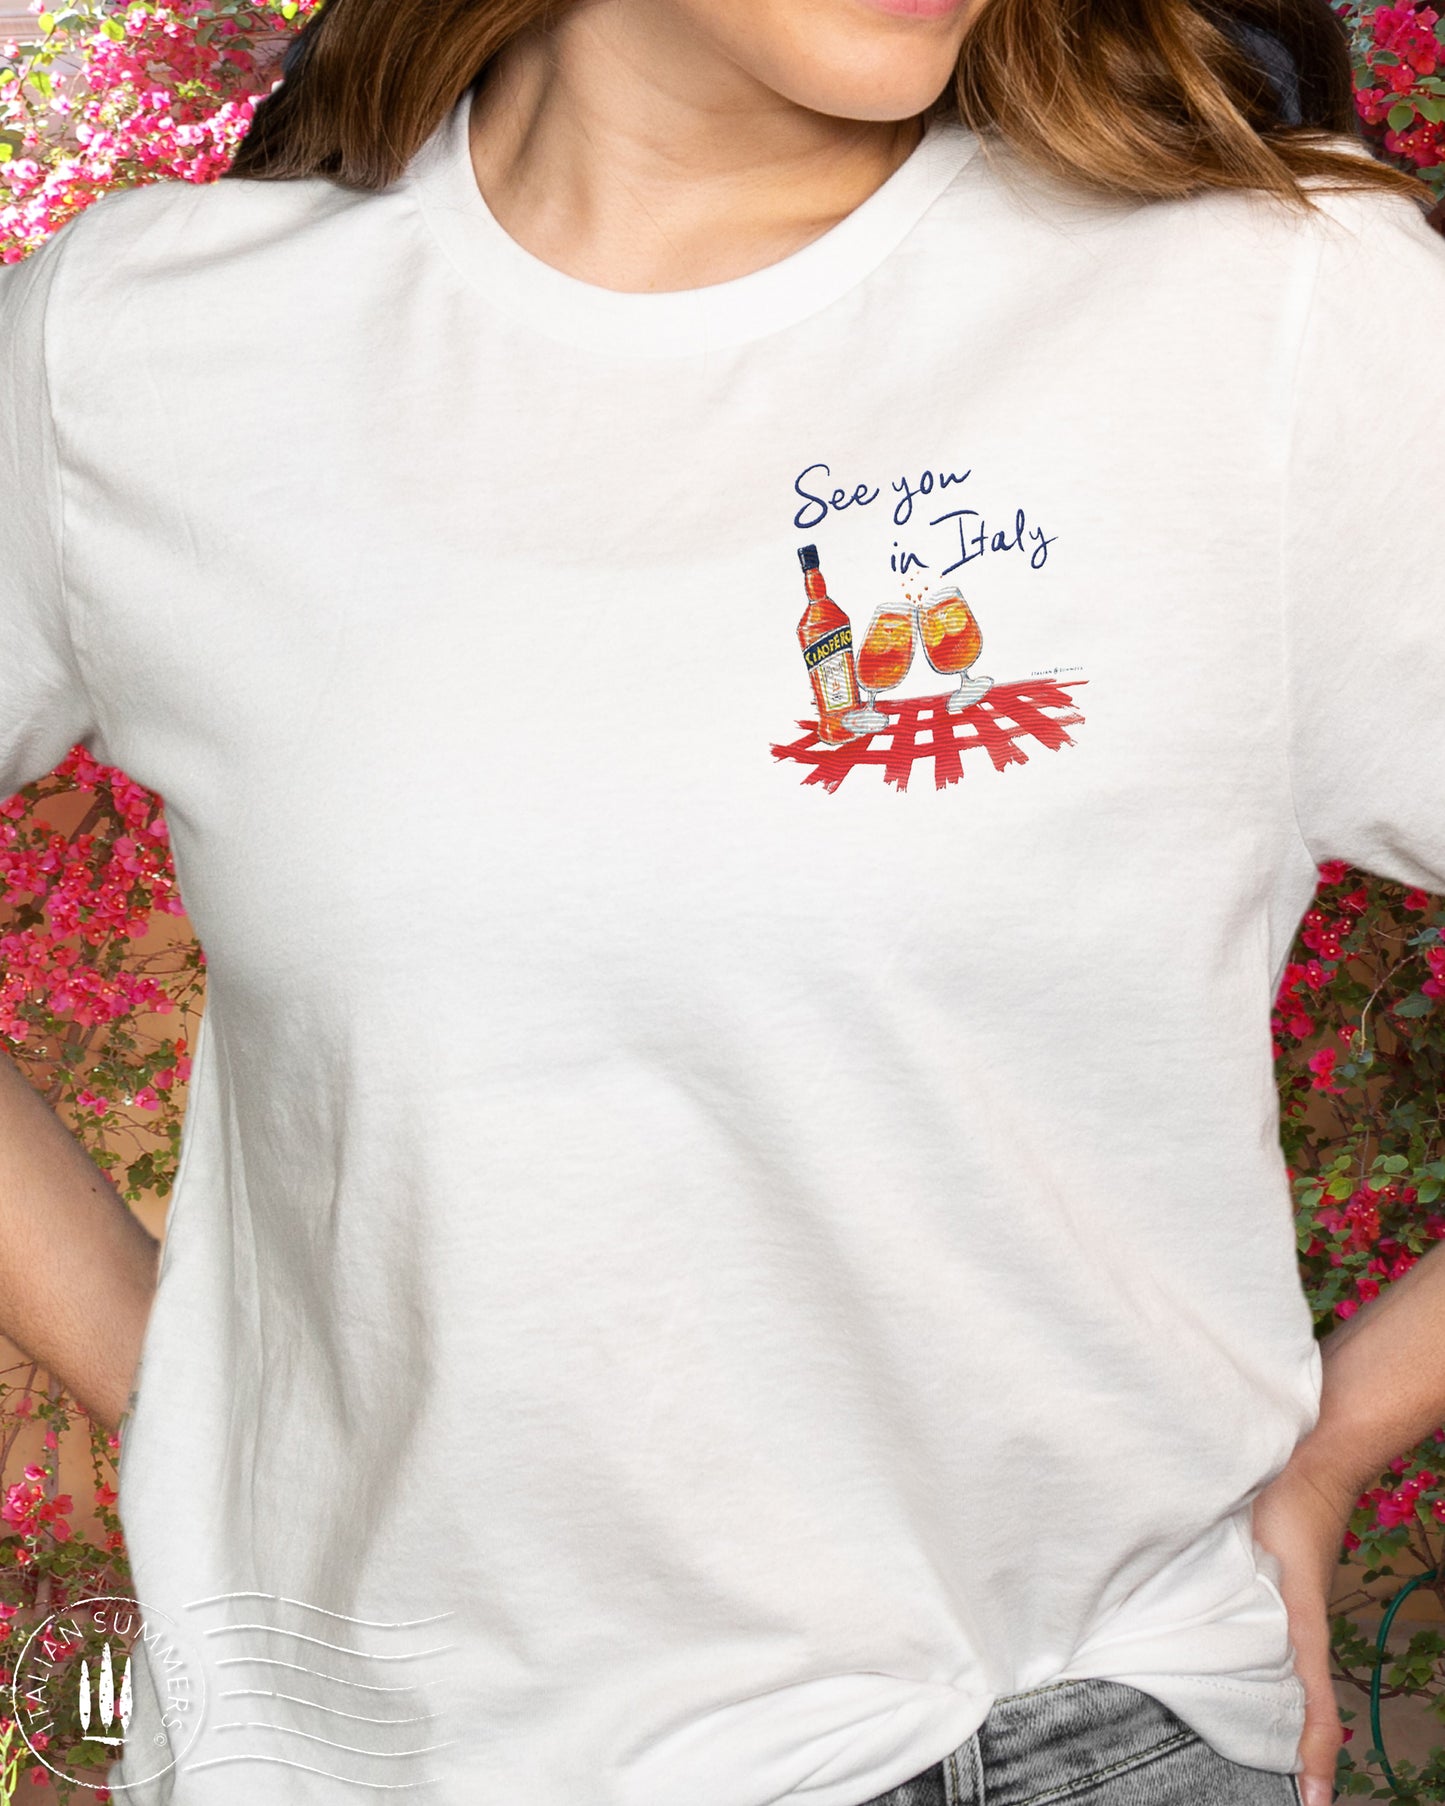 White cotton T shirt with an embroidered illustration on the left chest of two Aperol Spritz glasses in red-orange colors and a Aperol bottle on a red checkered tablecloth. Above, a Navy blue embroidered quote: See you in Italy Desgned and sold by Italian Summers